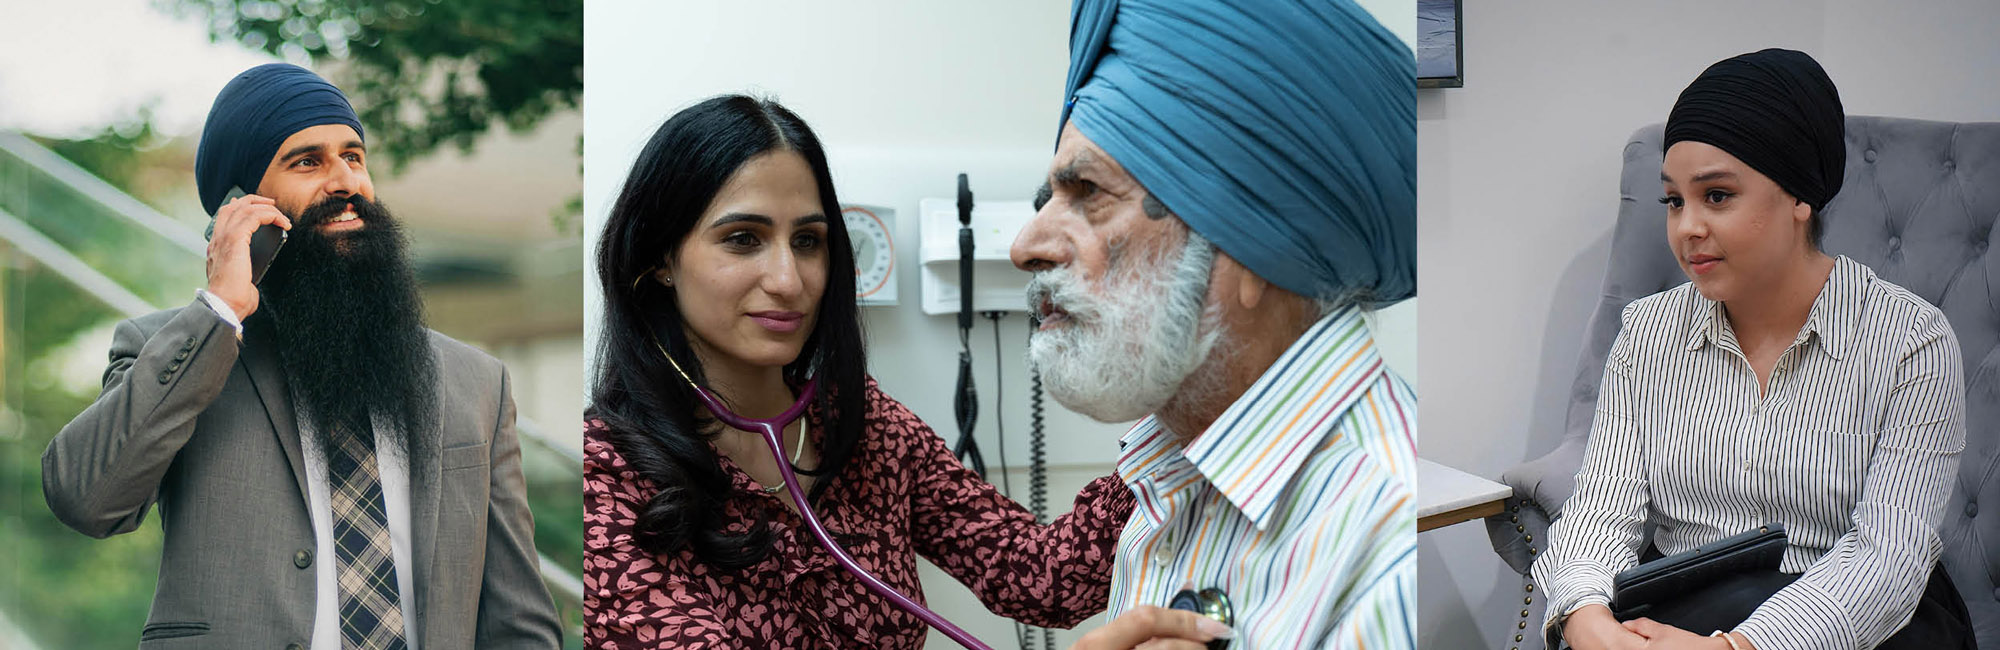 Sikh faculty and staff at TMU engaging in work, including meeting with colleagues and visiting with patients